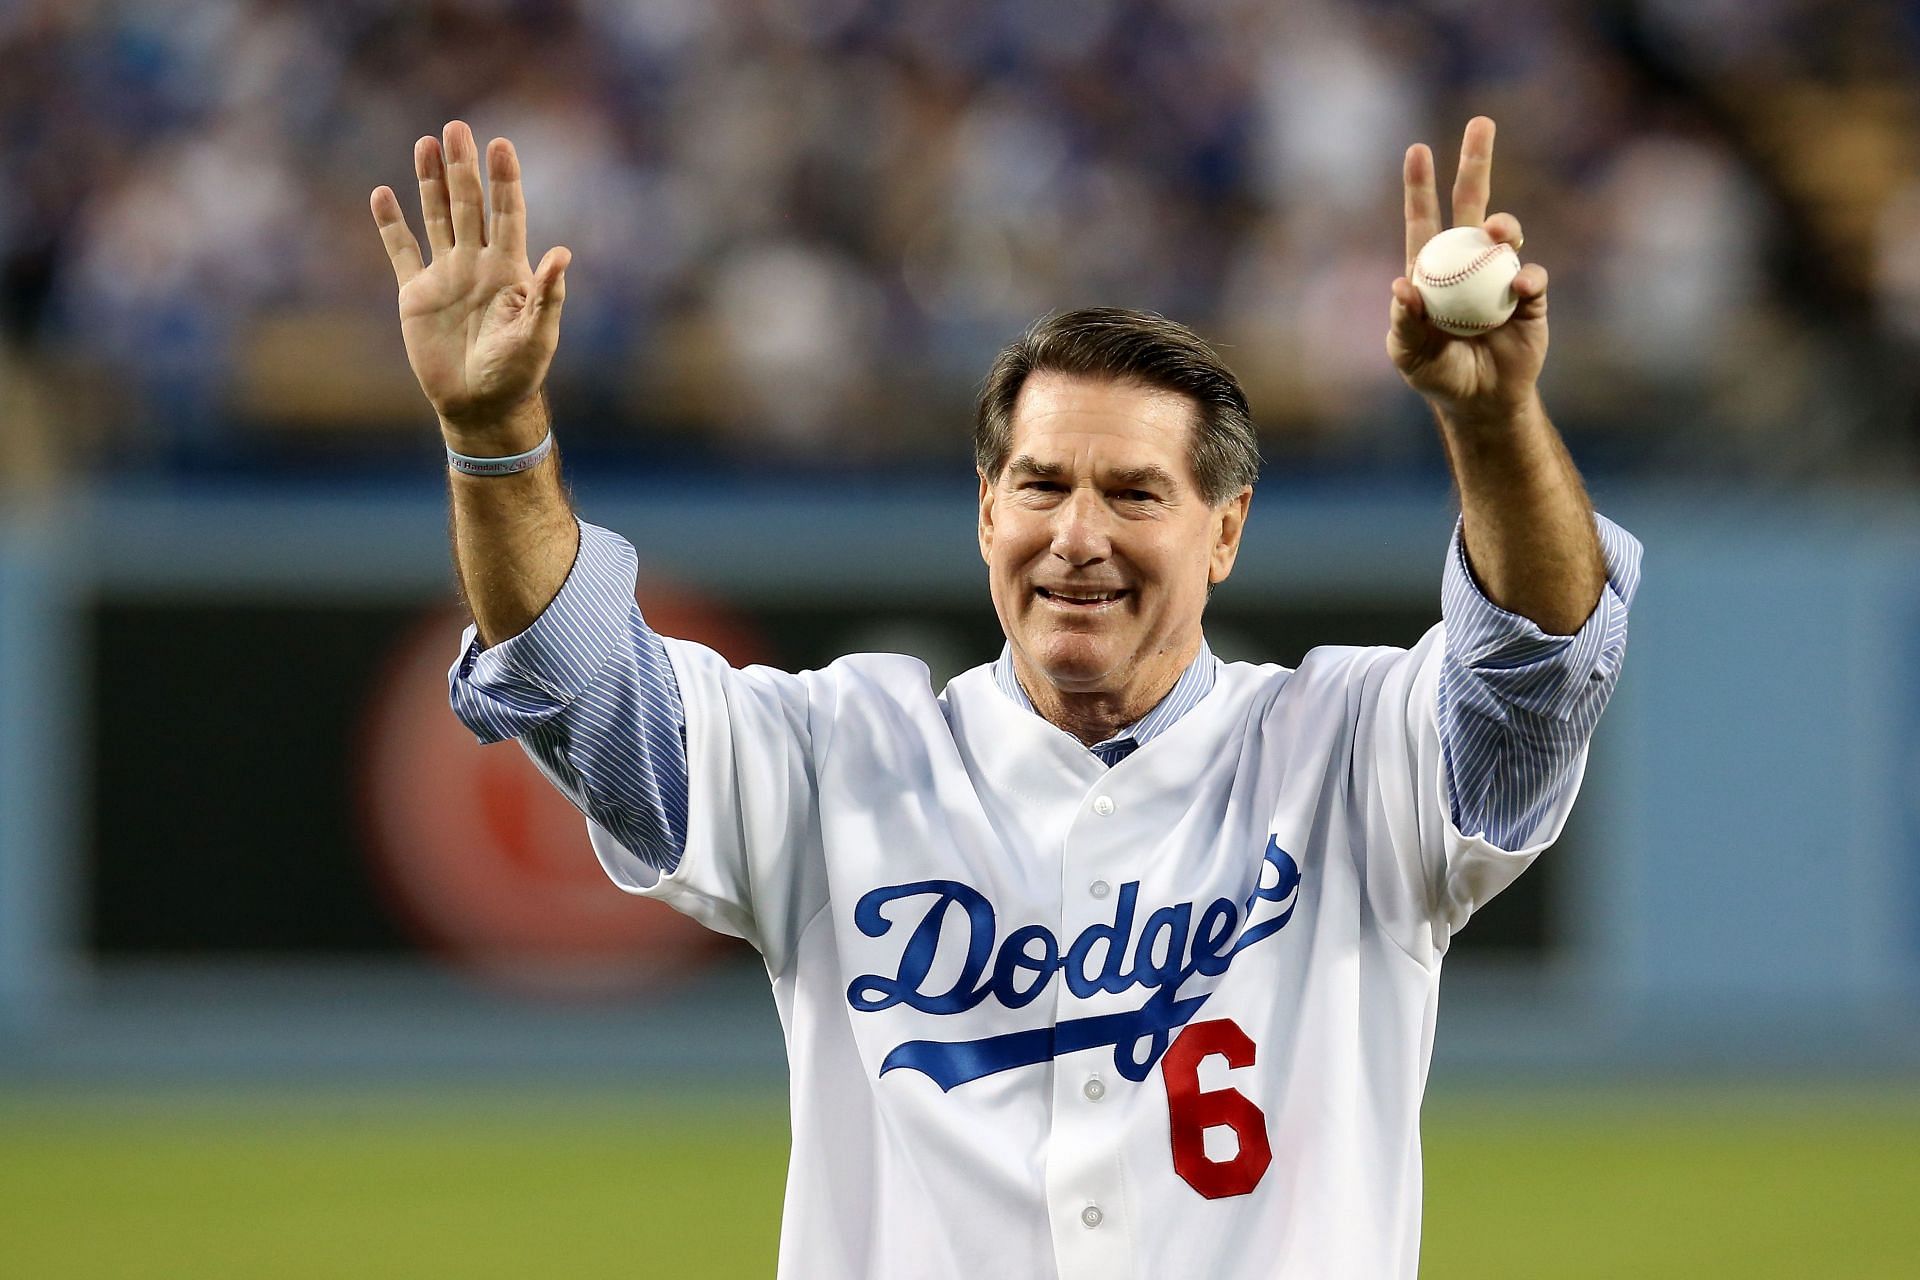 Los Angeles Dodgers legend Steve Garvey throws out a ceremonial first pitch before the Dodgers take on the Atlanta Braves in Game Four of the National League Division Series at Dodger Stadium on October 7, 2013 in Los Angeles, California. (Photo by Stephen Dunn/Getty Images)